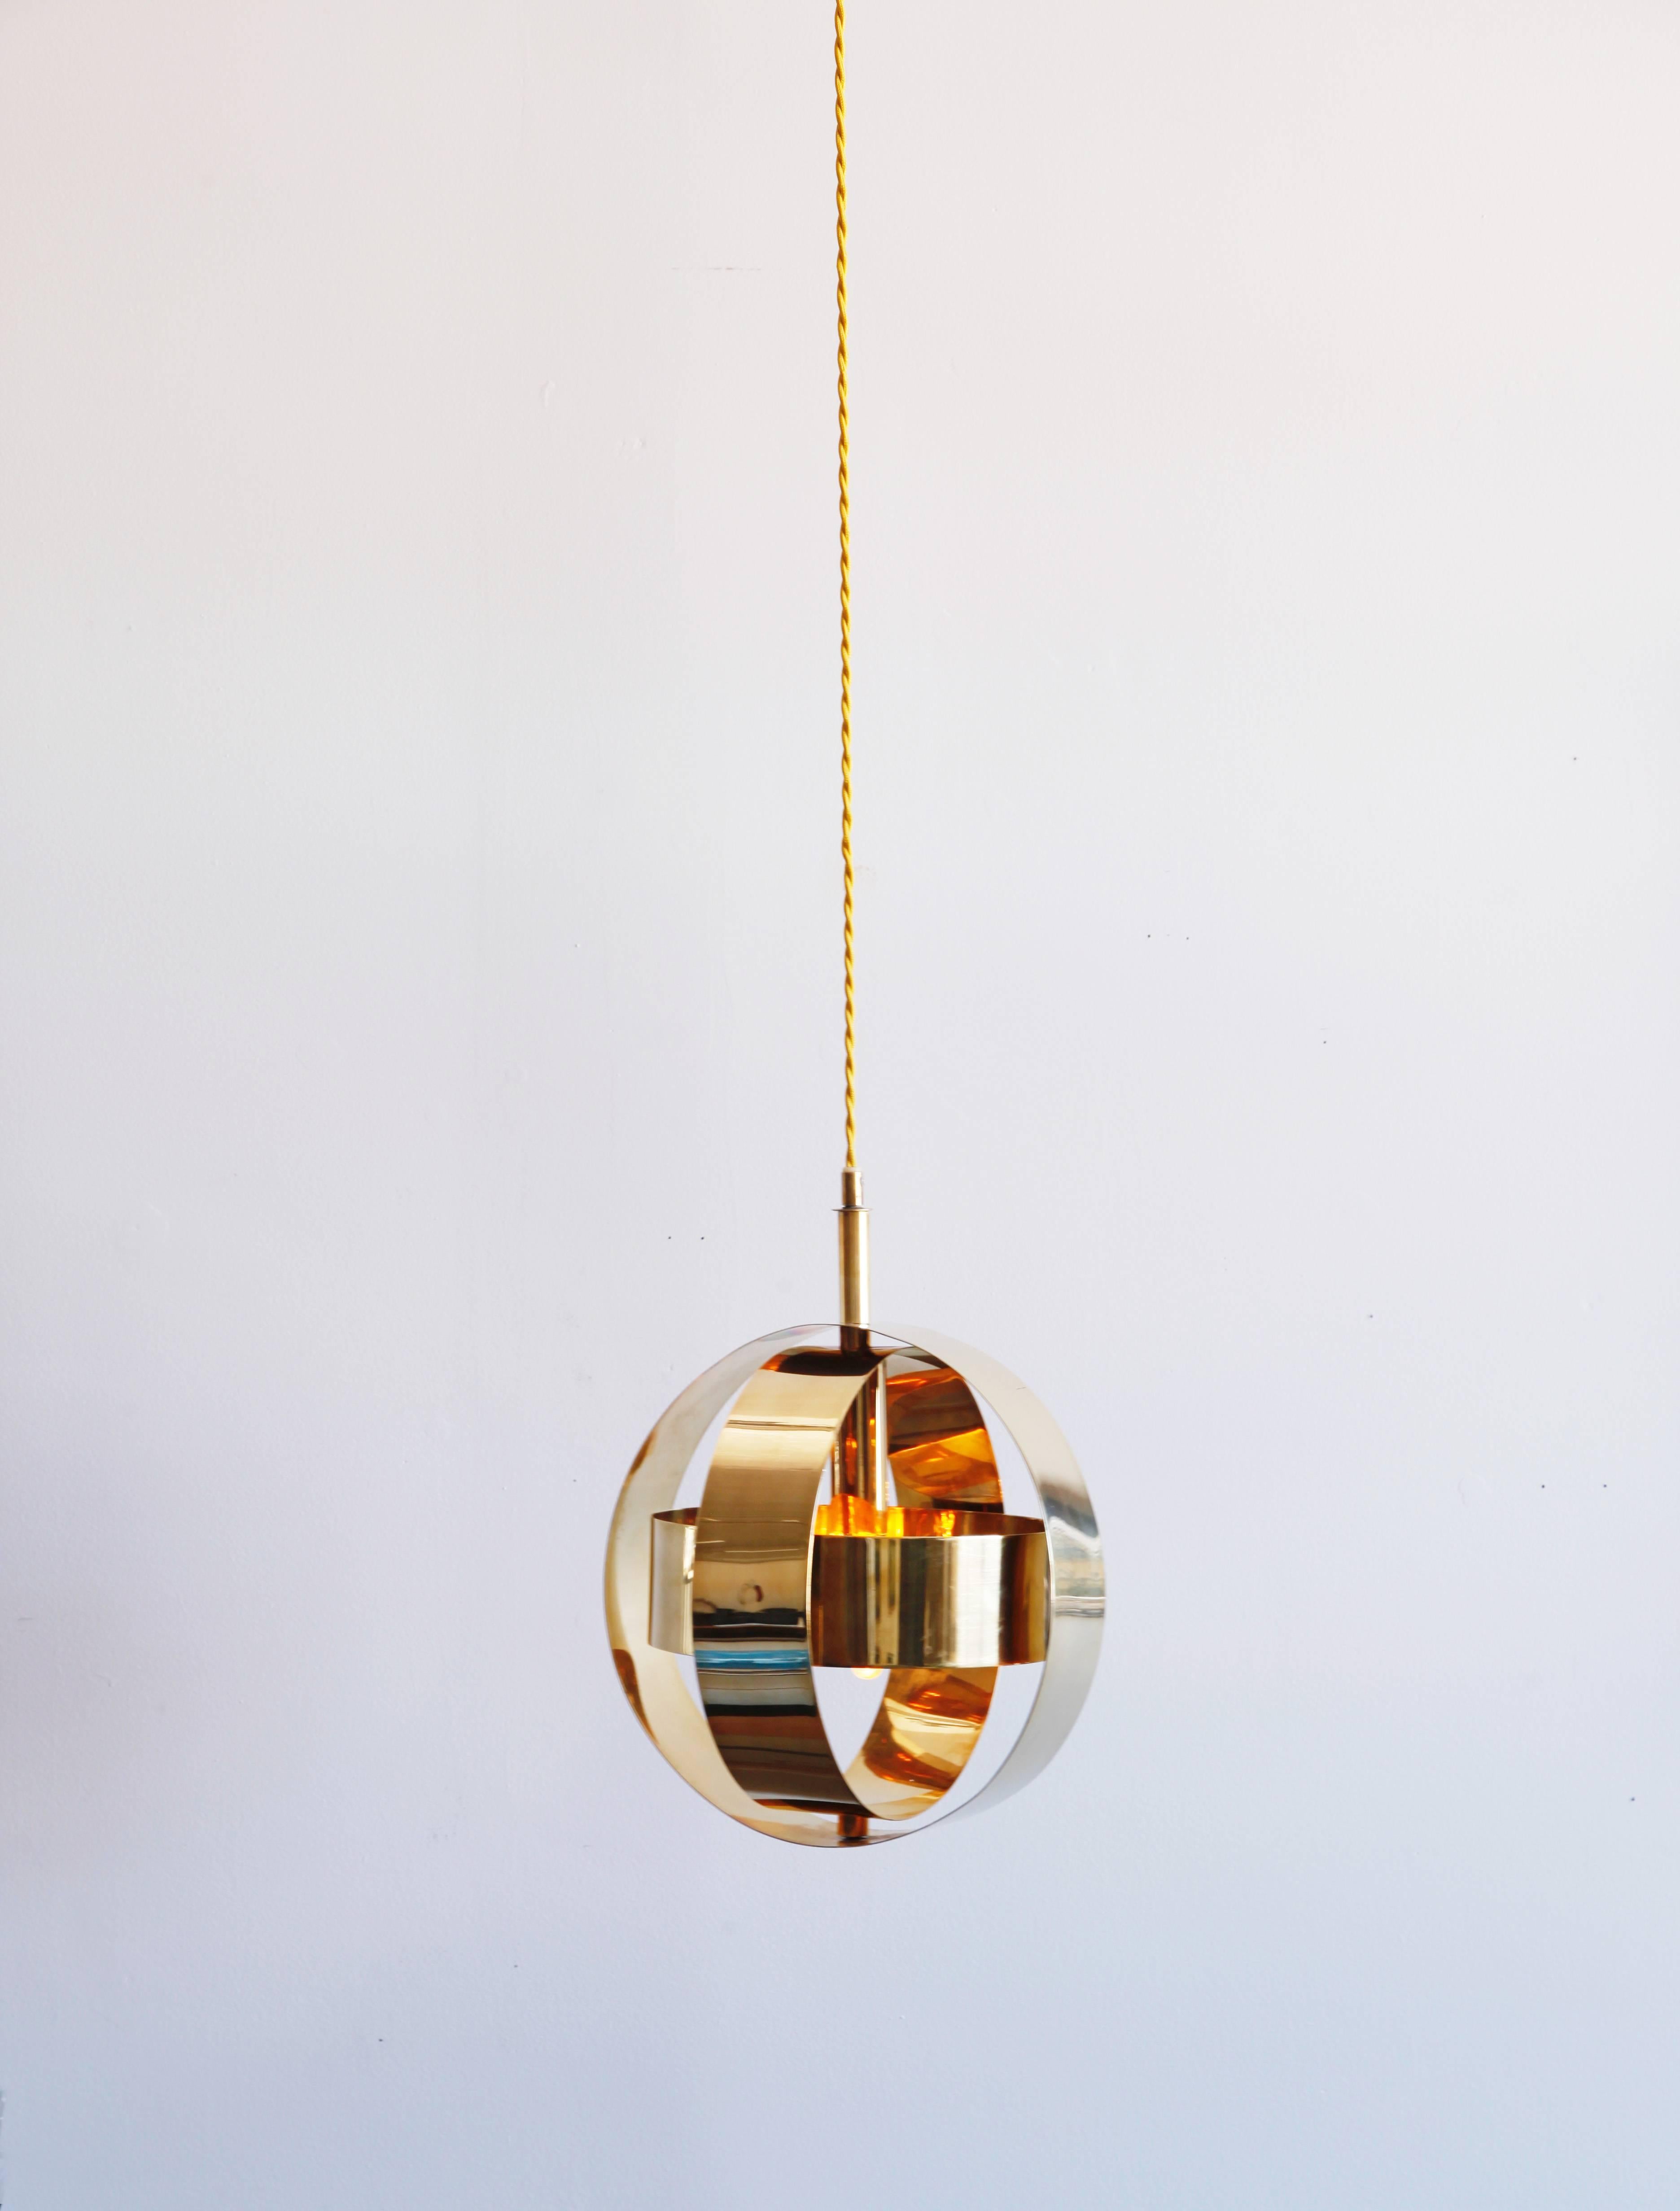 Elegant but playful, sculptural but unobtrusive, this versatile brass pendant light shines in formal or casual interiors and within a wide range of design eras. It's a clever and very unusual design.